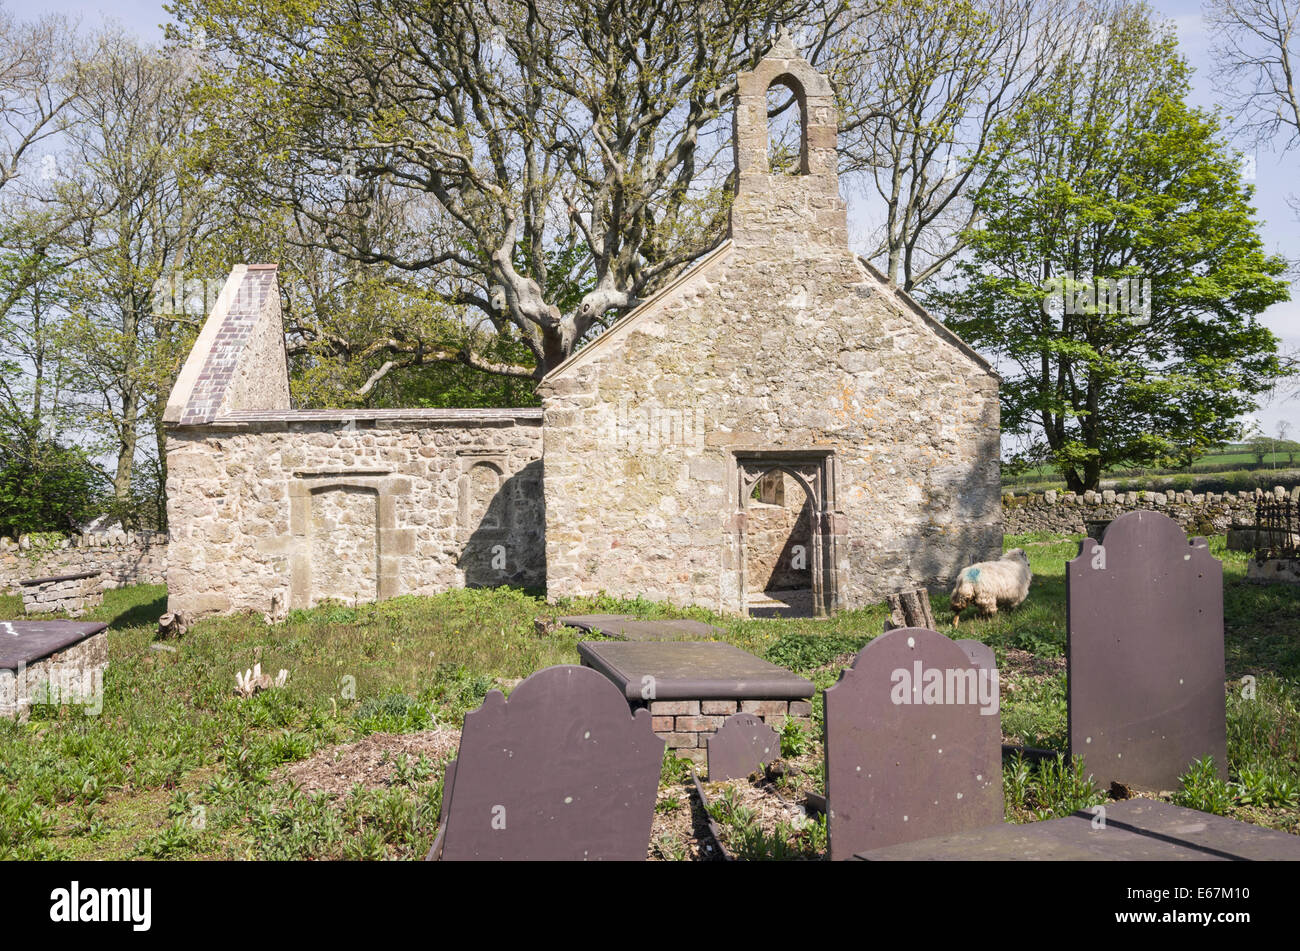 Remains of a disused and abandoned country parish church near Pentre Berw, Isle of Anglesey, North Wales, UK, Britain Stock Photo